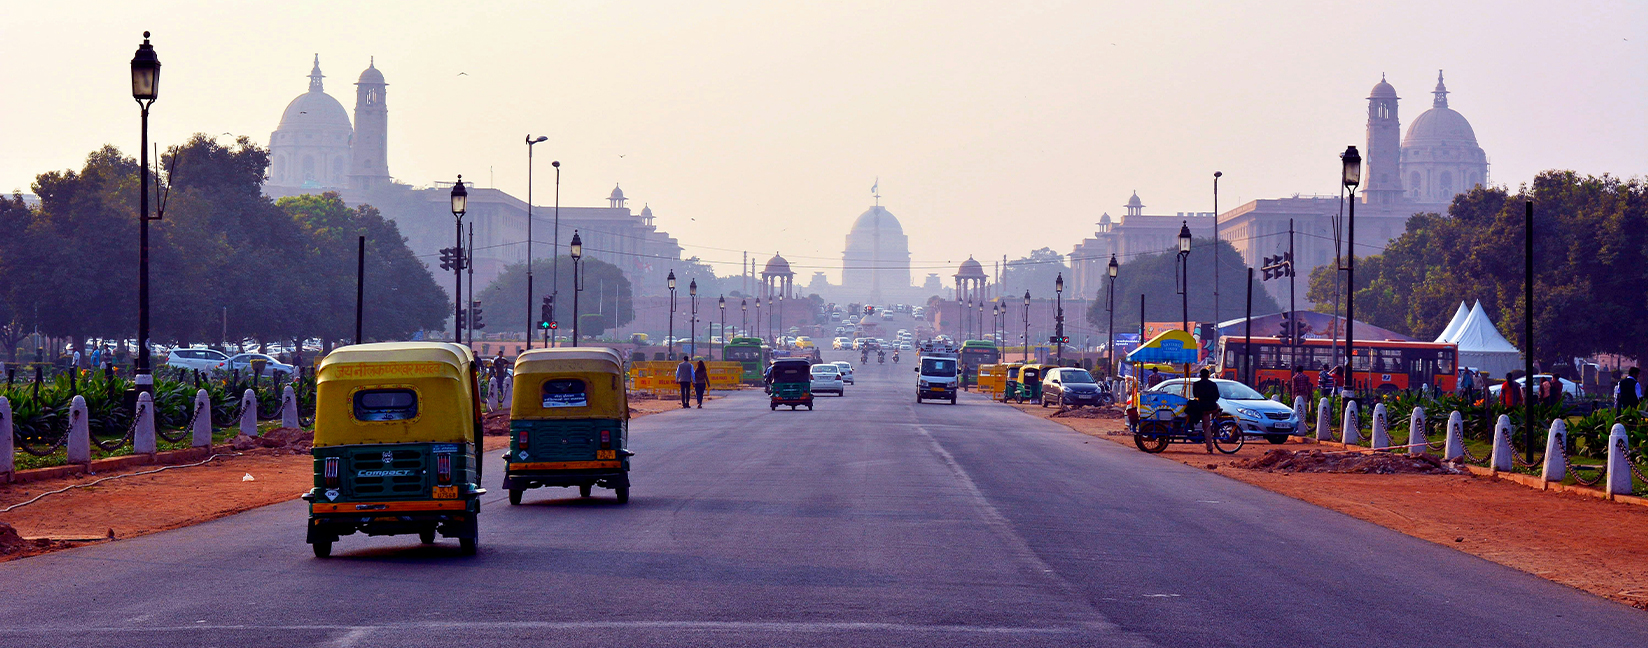 Best Delhi Holiday Packages